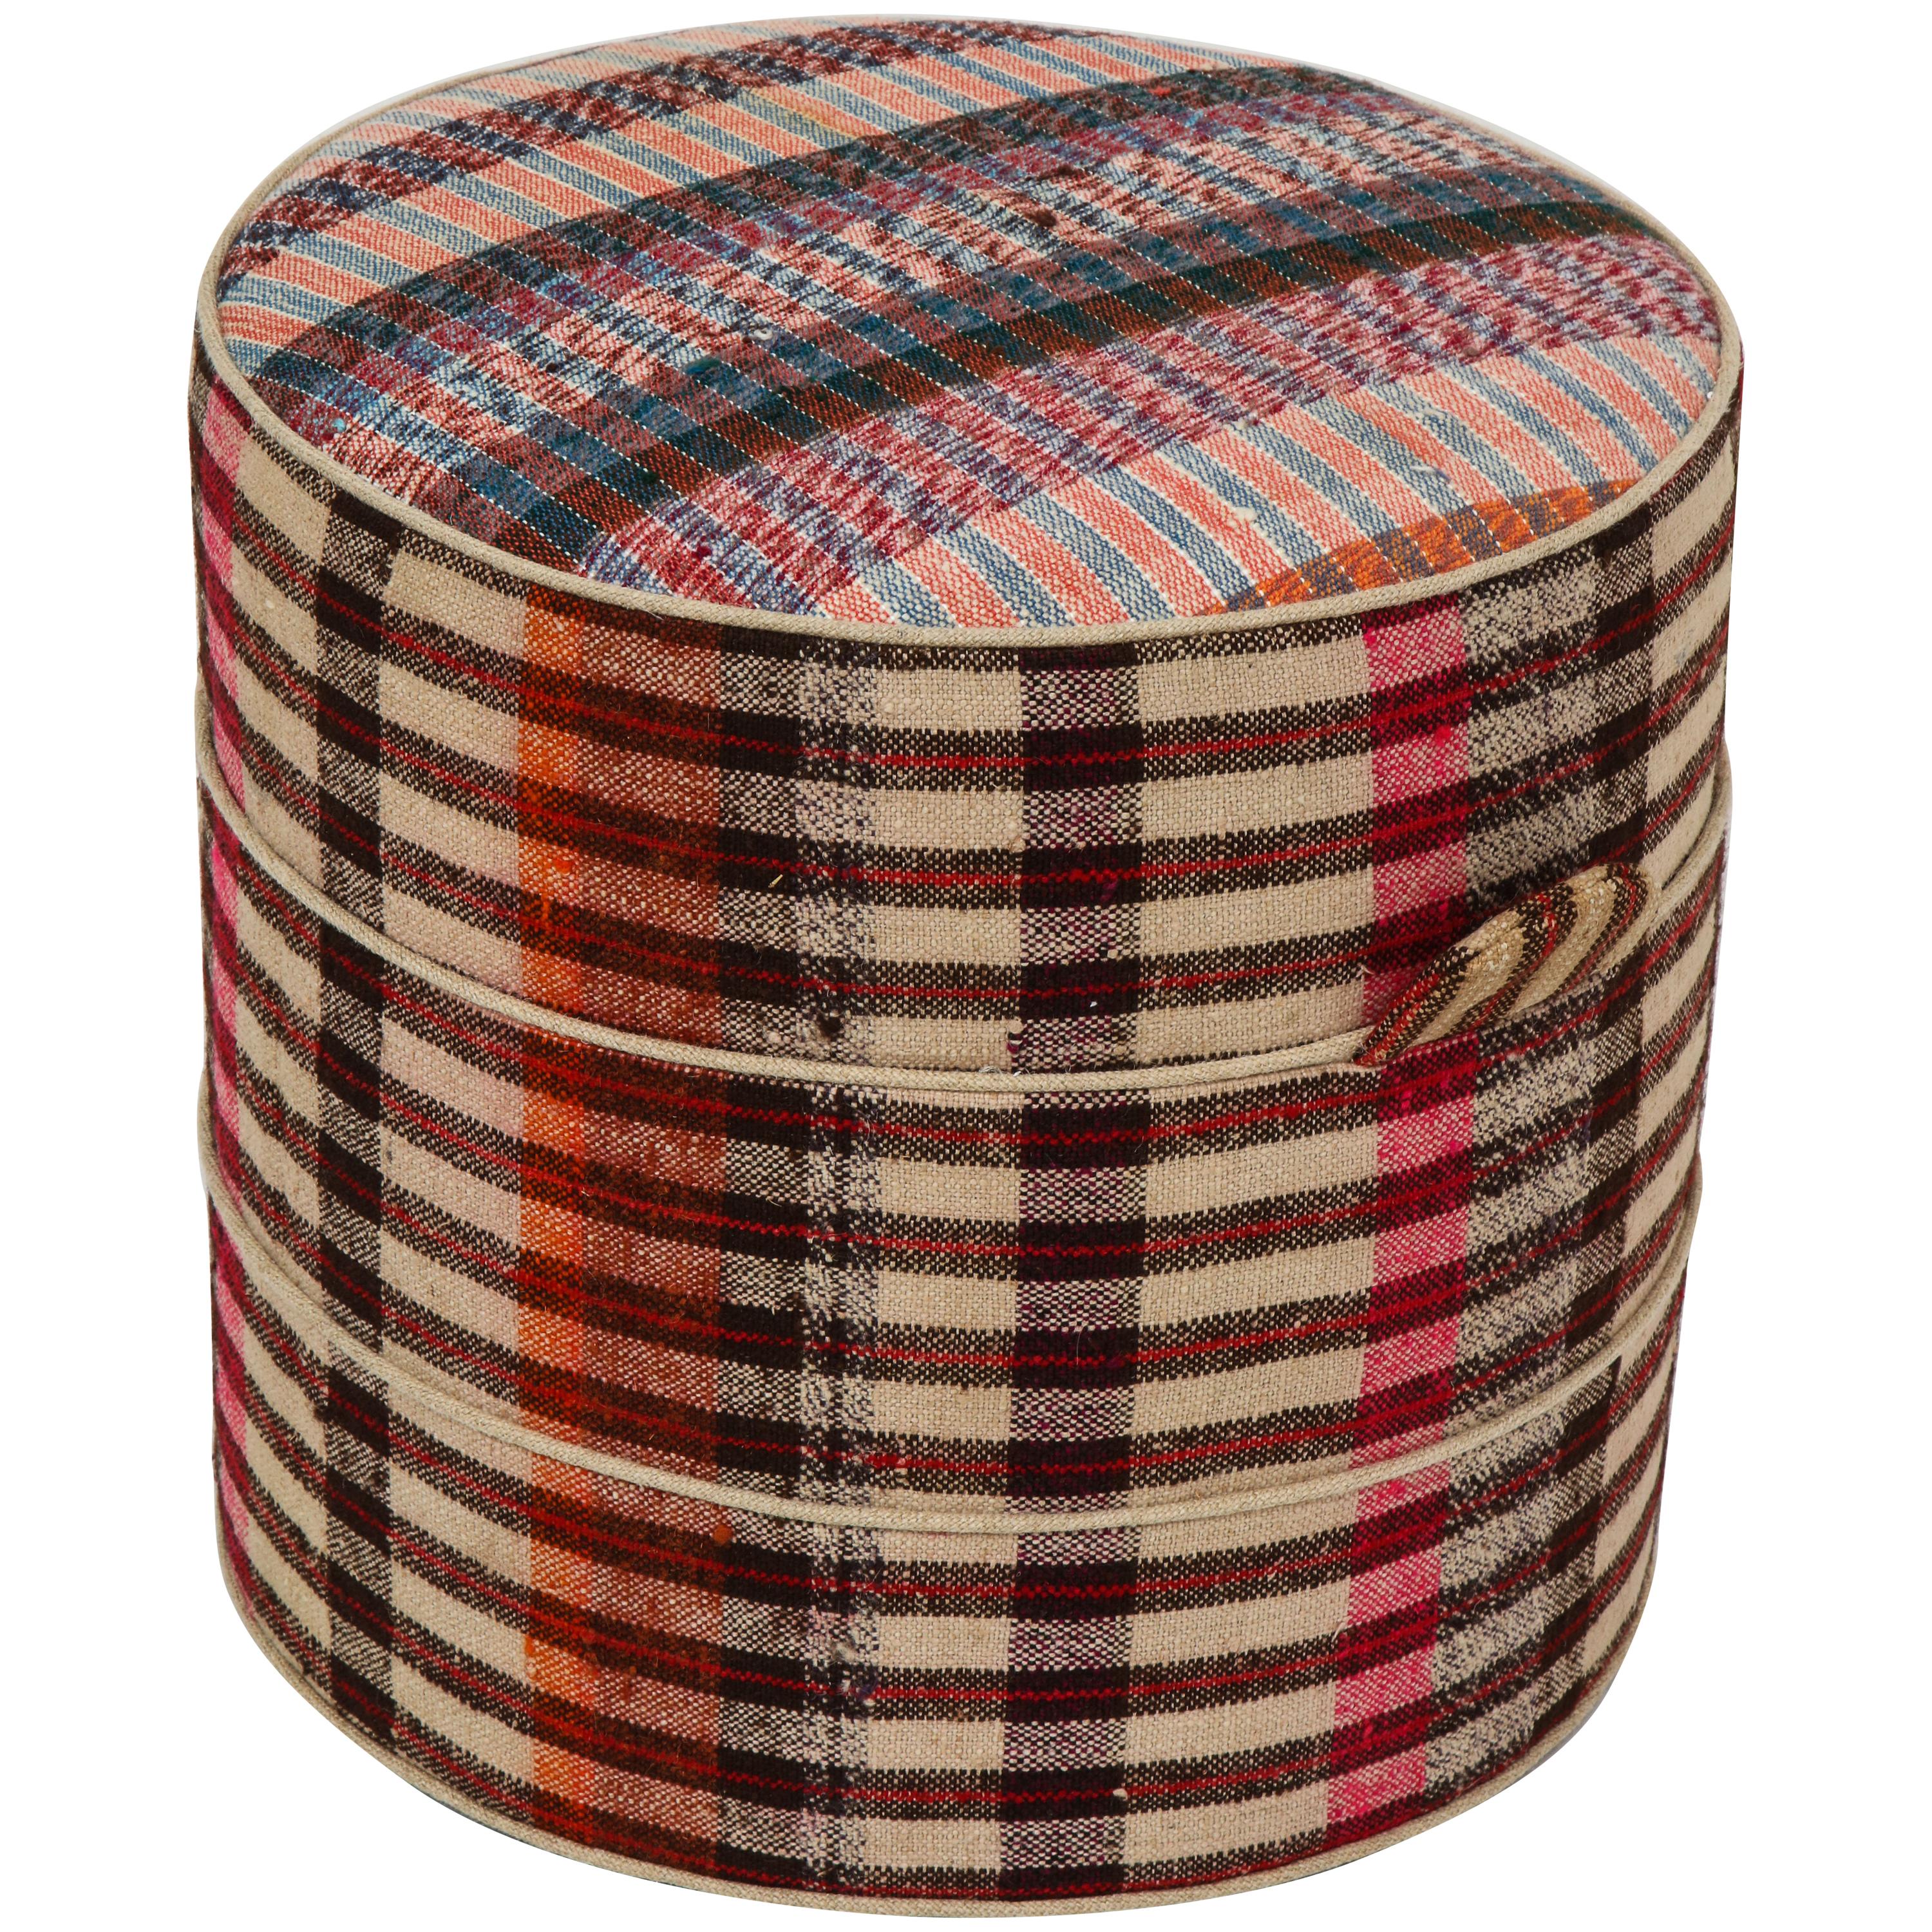 Nickey Kehoe Collection Small Round Hassock in Vintage Plaid Fabric